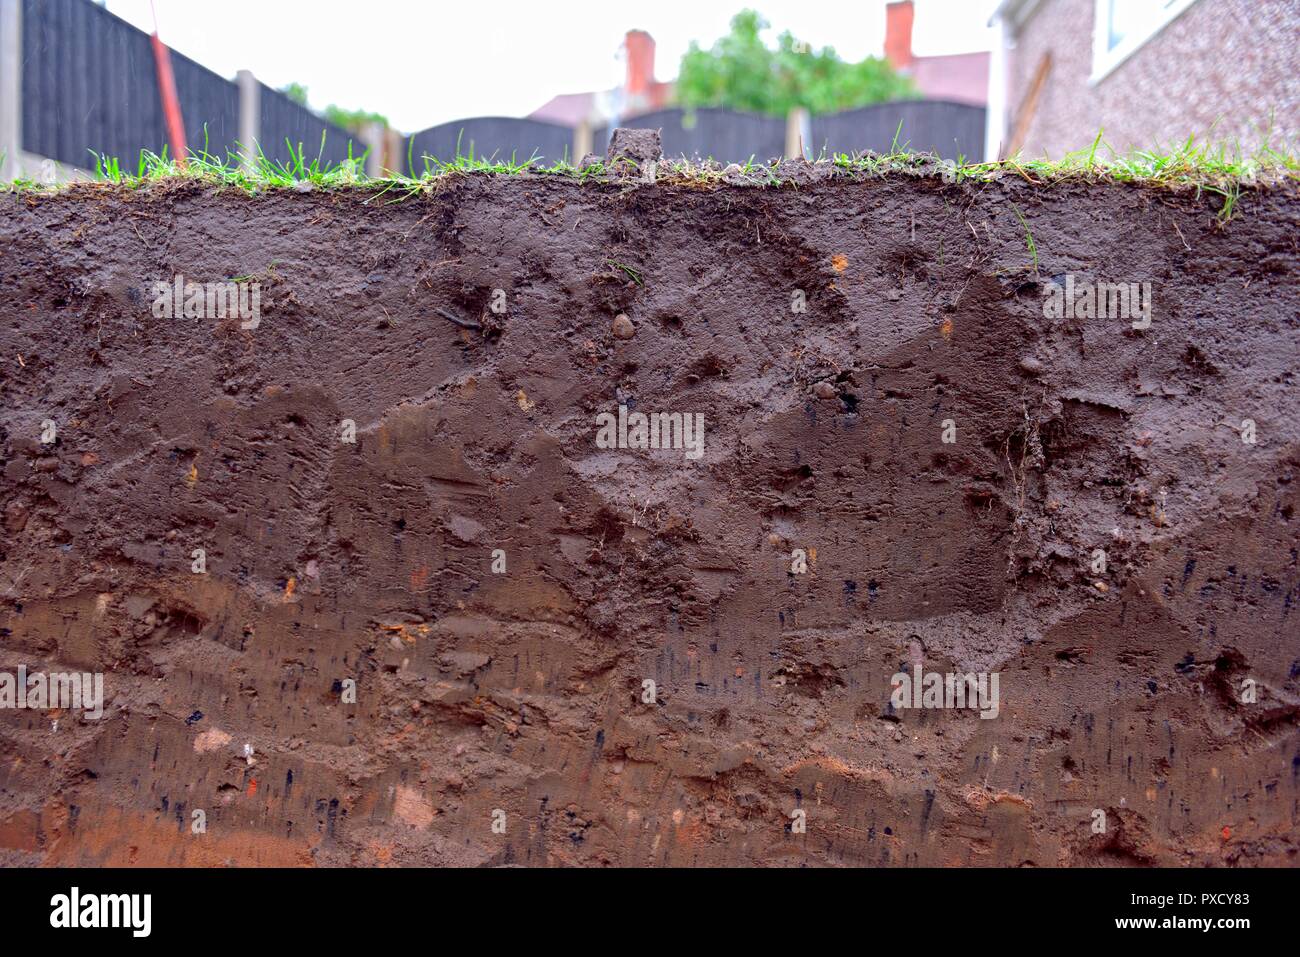 Layers of soil in a domestic garden in the UK Stock Photo